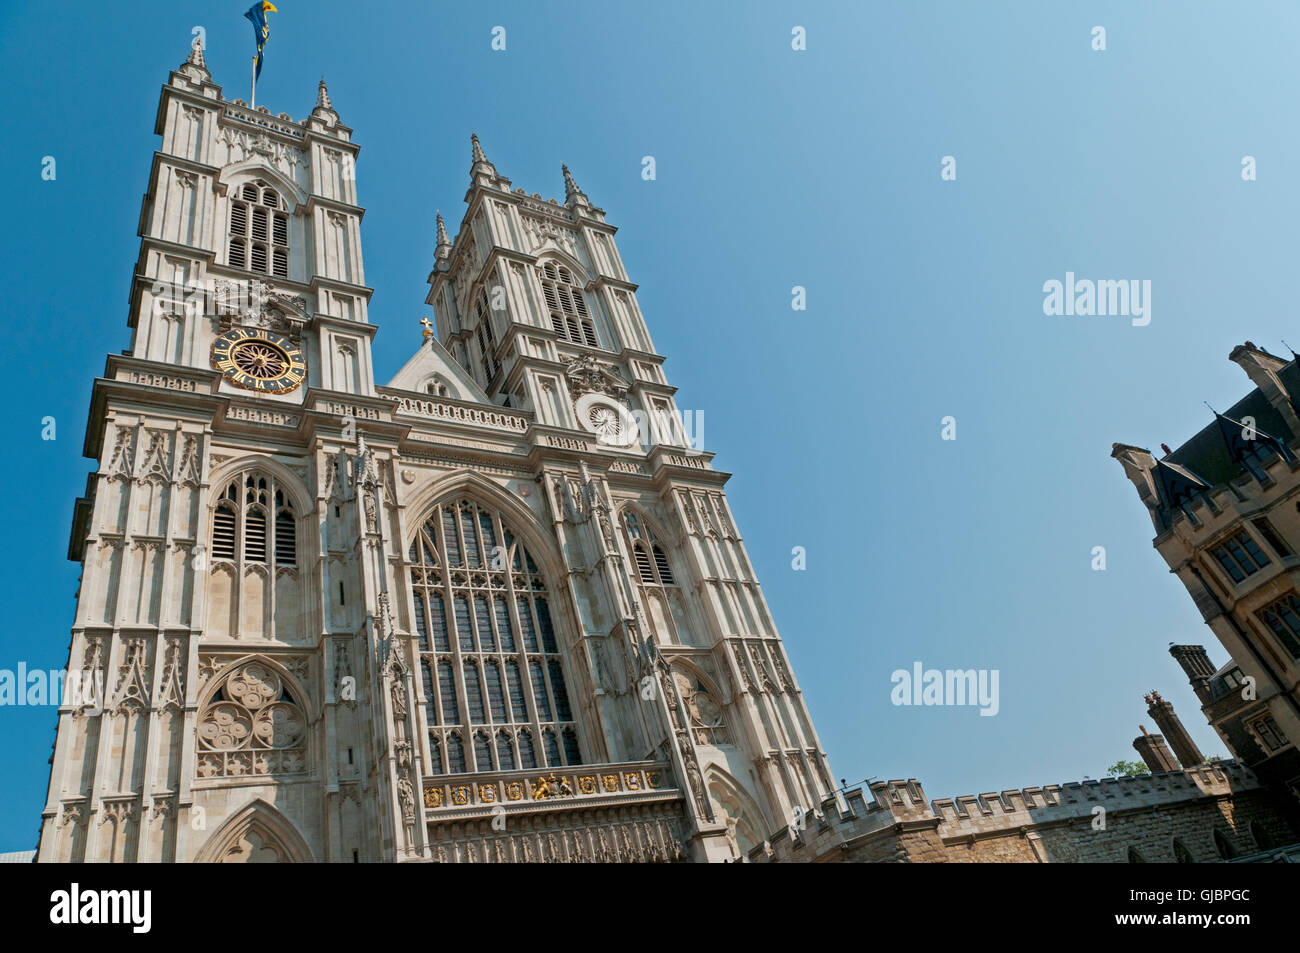 Westminster Abbey in London, England. Stock Photo